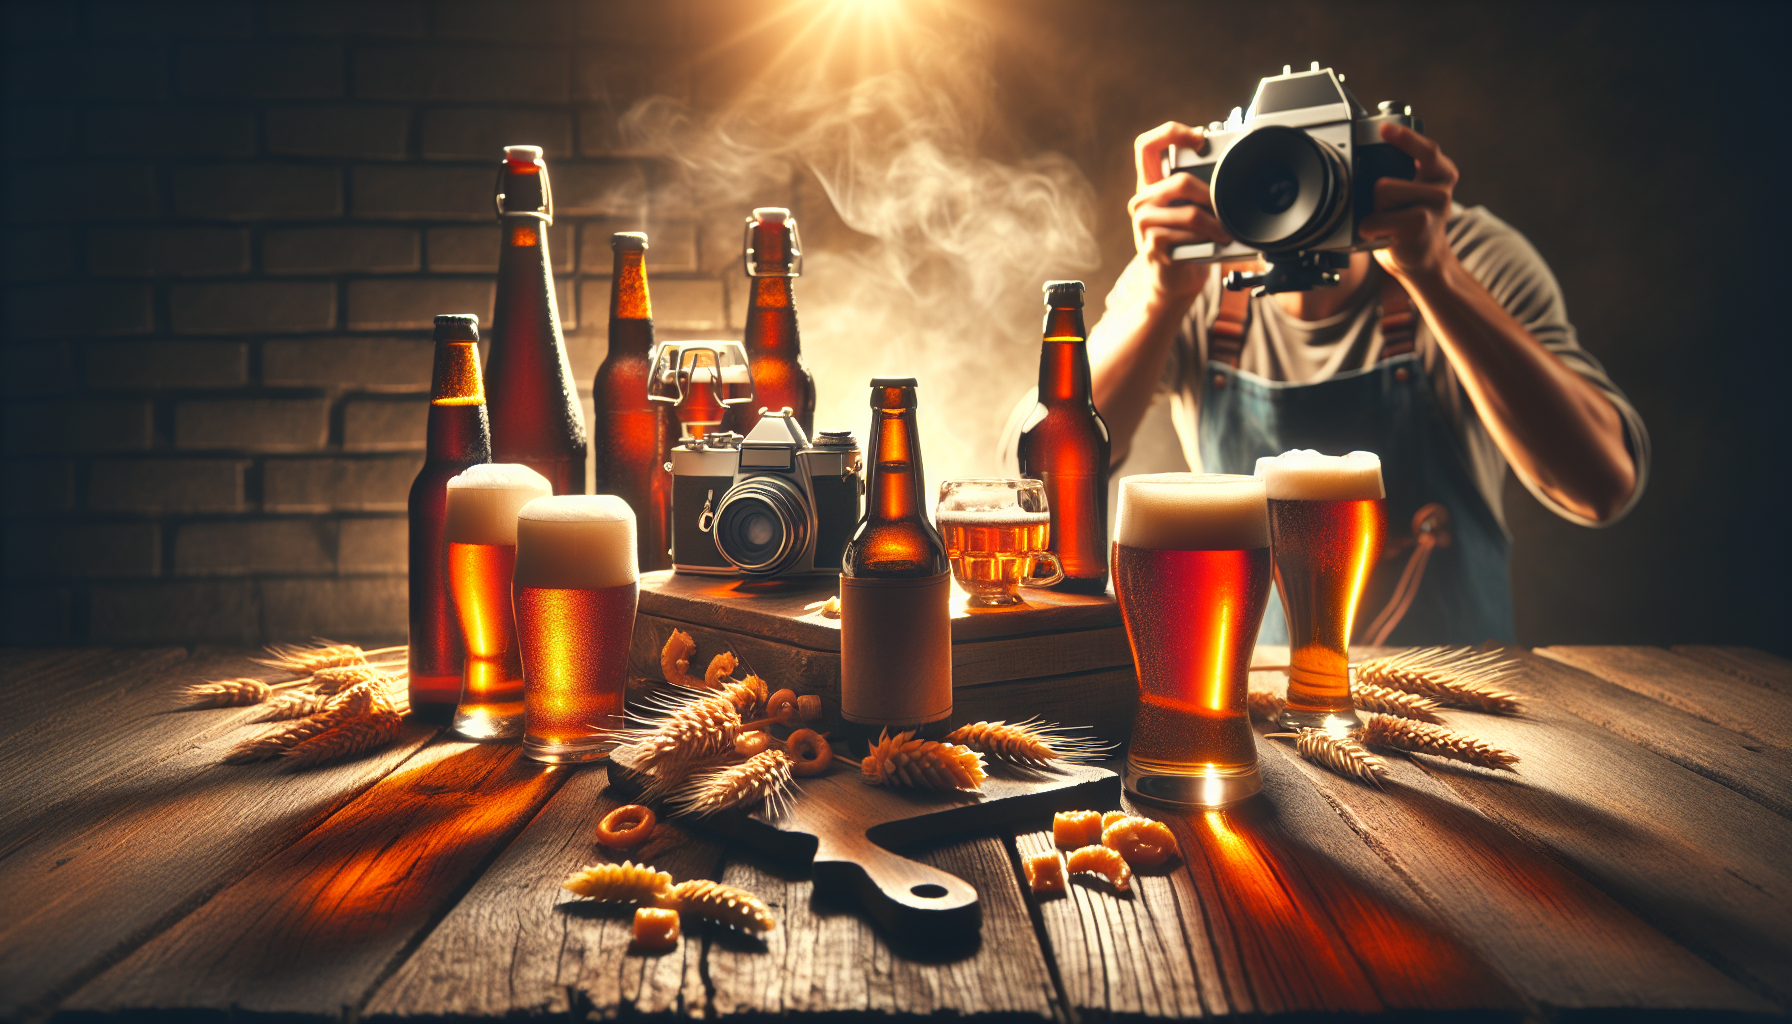 Is Beer Advocate: Your Ultimate Guide to Craft Beer and Brewery Reviews?